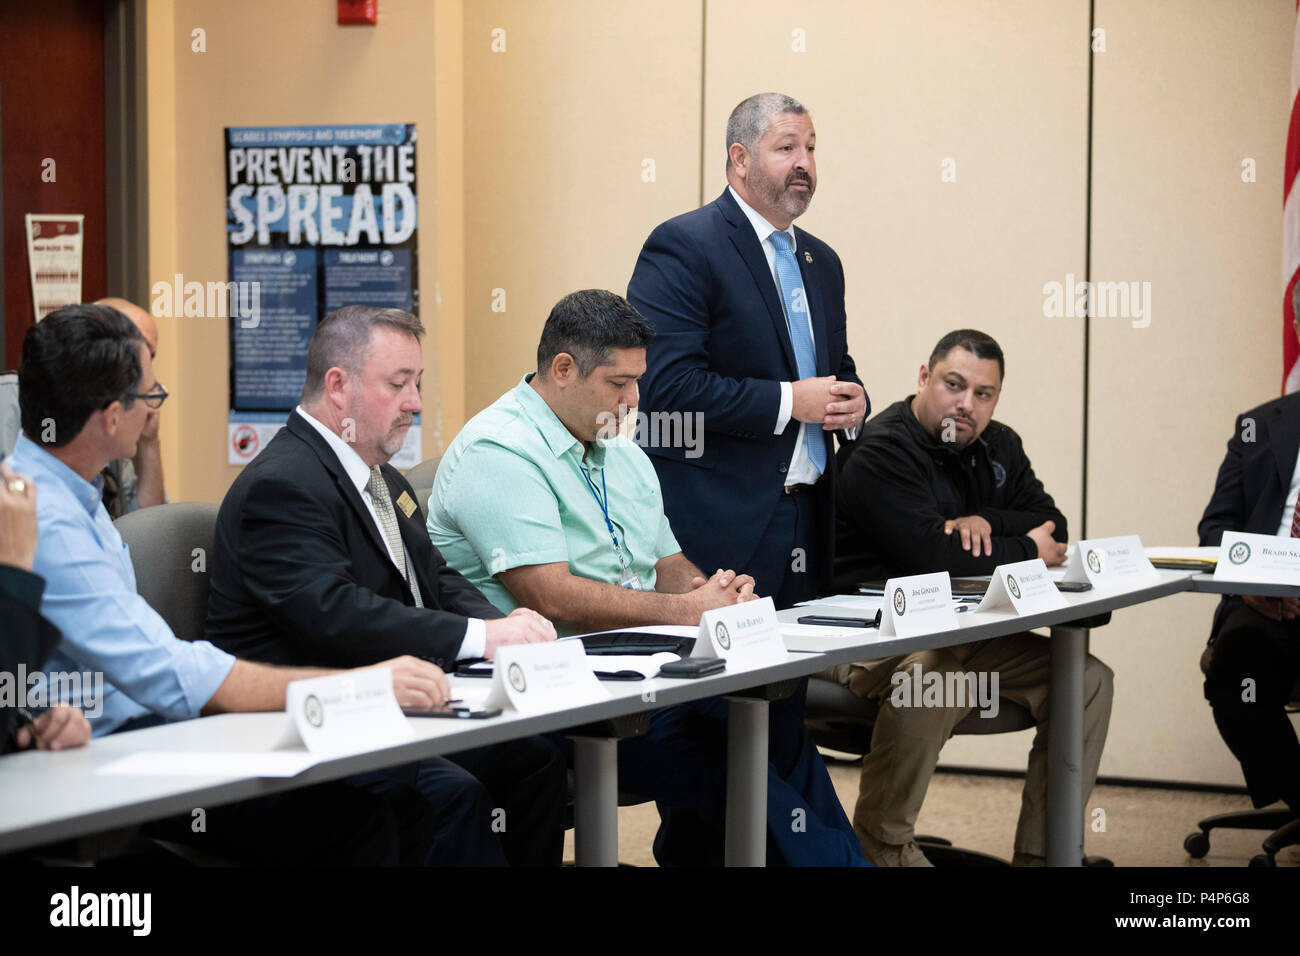 Henry Lucero, field director of ICE Enforcement and Removal Operations, speaks as federal and Texas officials and stakeholders meet in a roundtable discussion of the immigration crisis hitting the Texas-Mexico border. Confusion and public outrage reigned regarding the Trump administration's policy of separating undocumented immigrant parents from their children after crossing into the U.S. from Mexico. Stock Photo